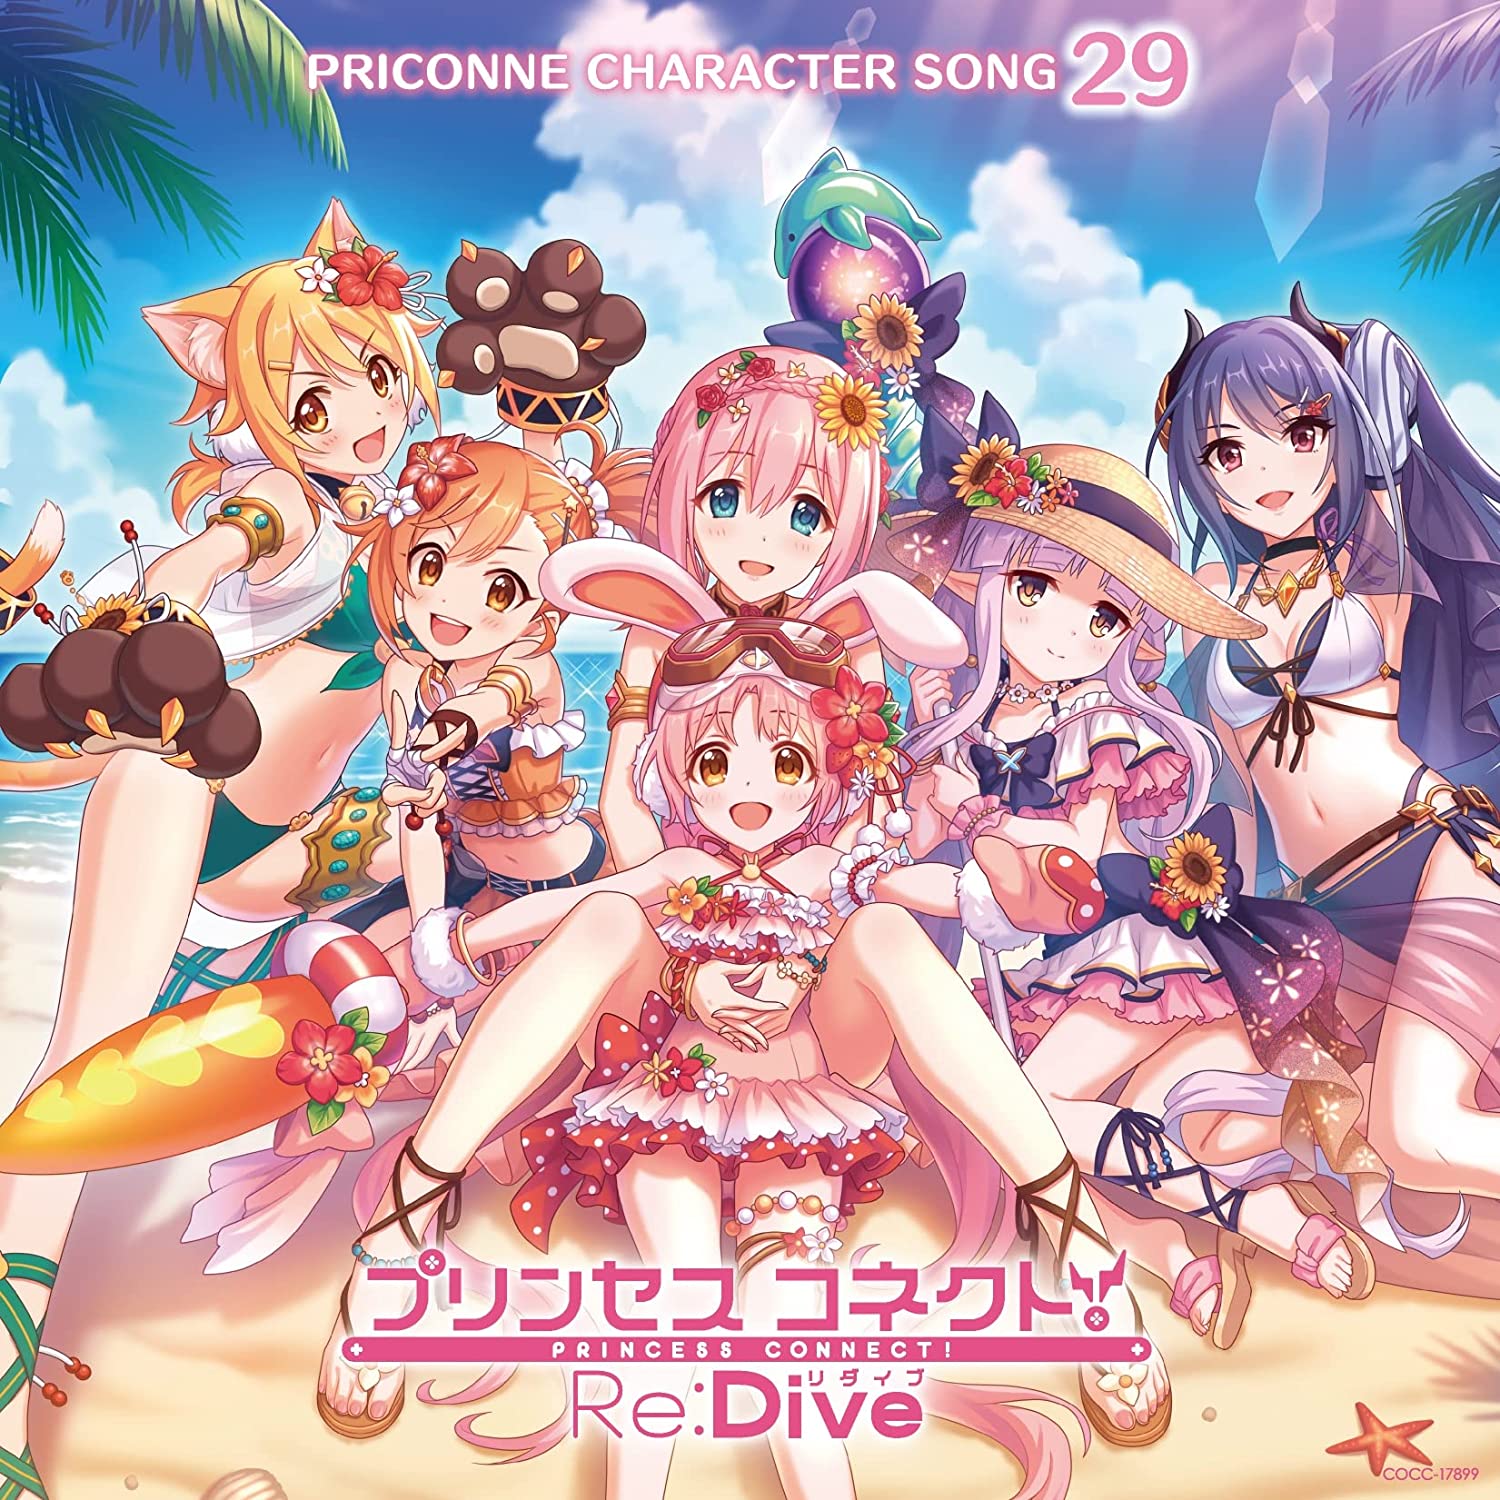 PRICONNE CHARACTER SONG 29.jpg